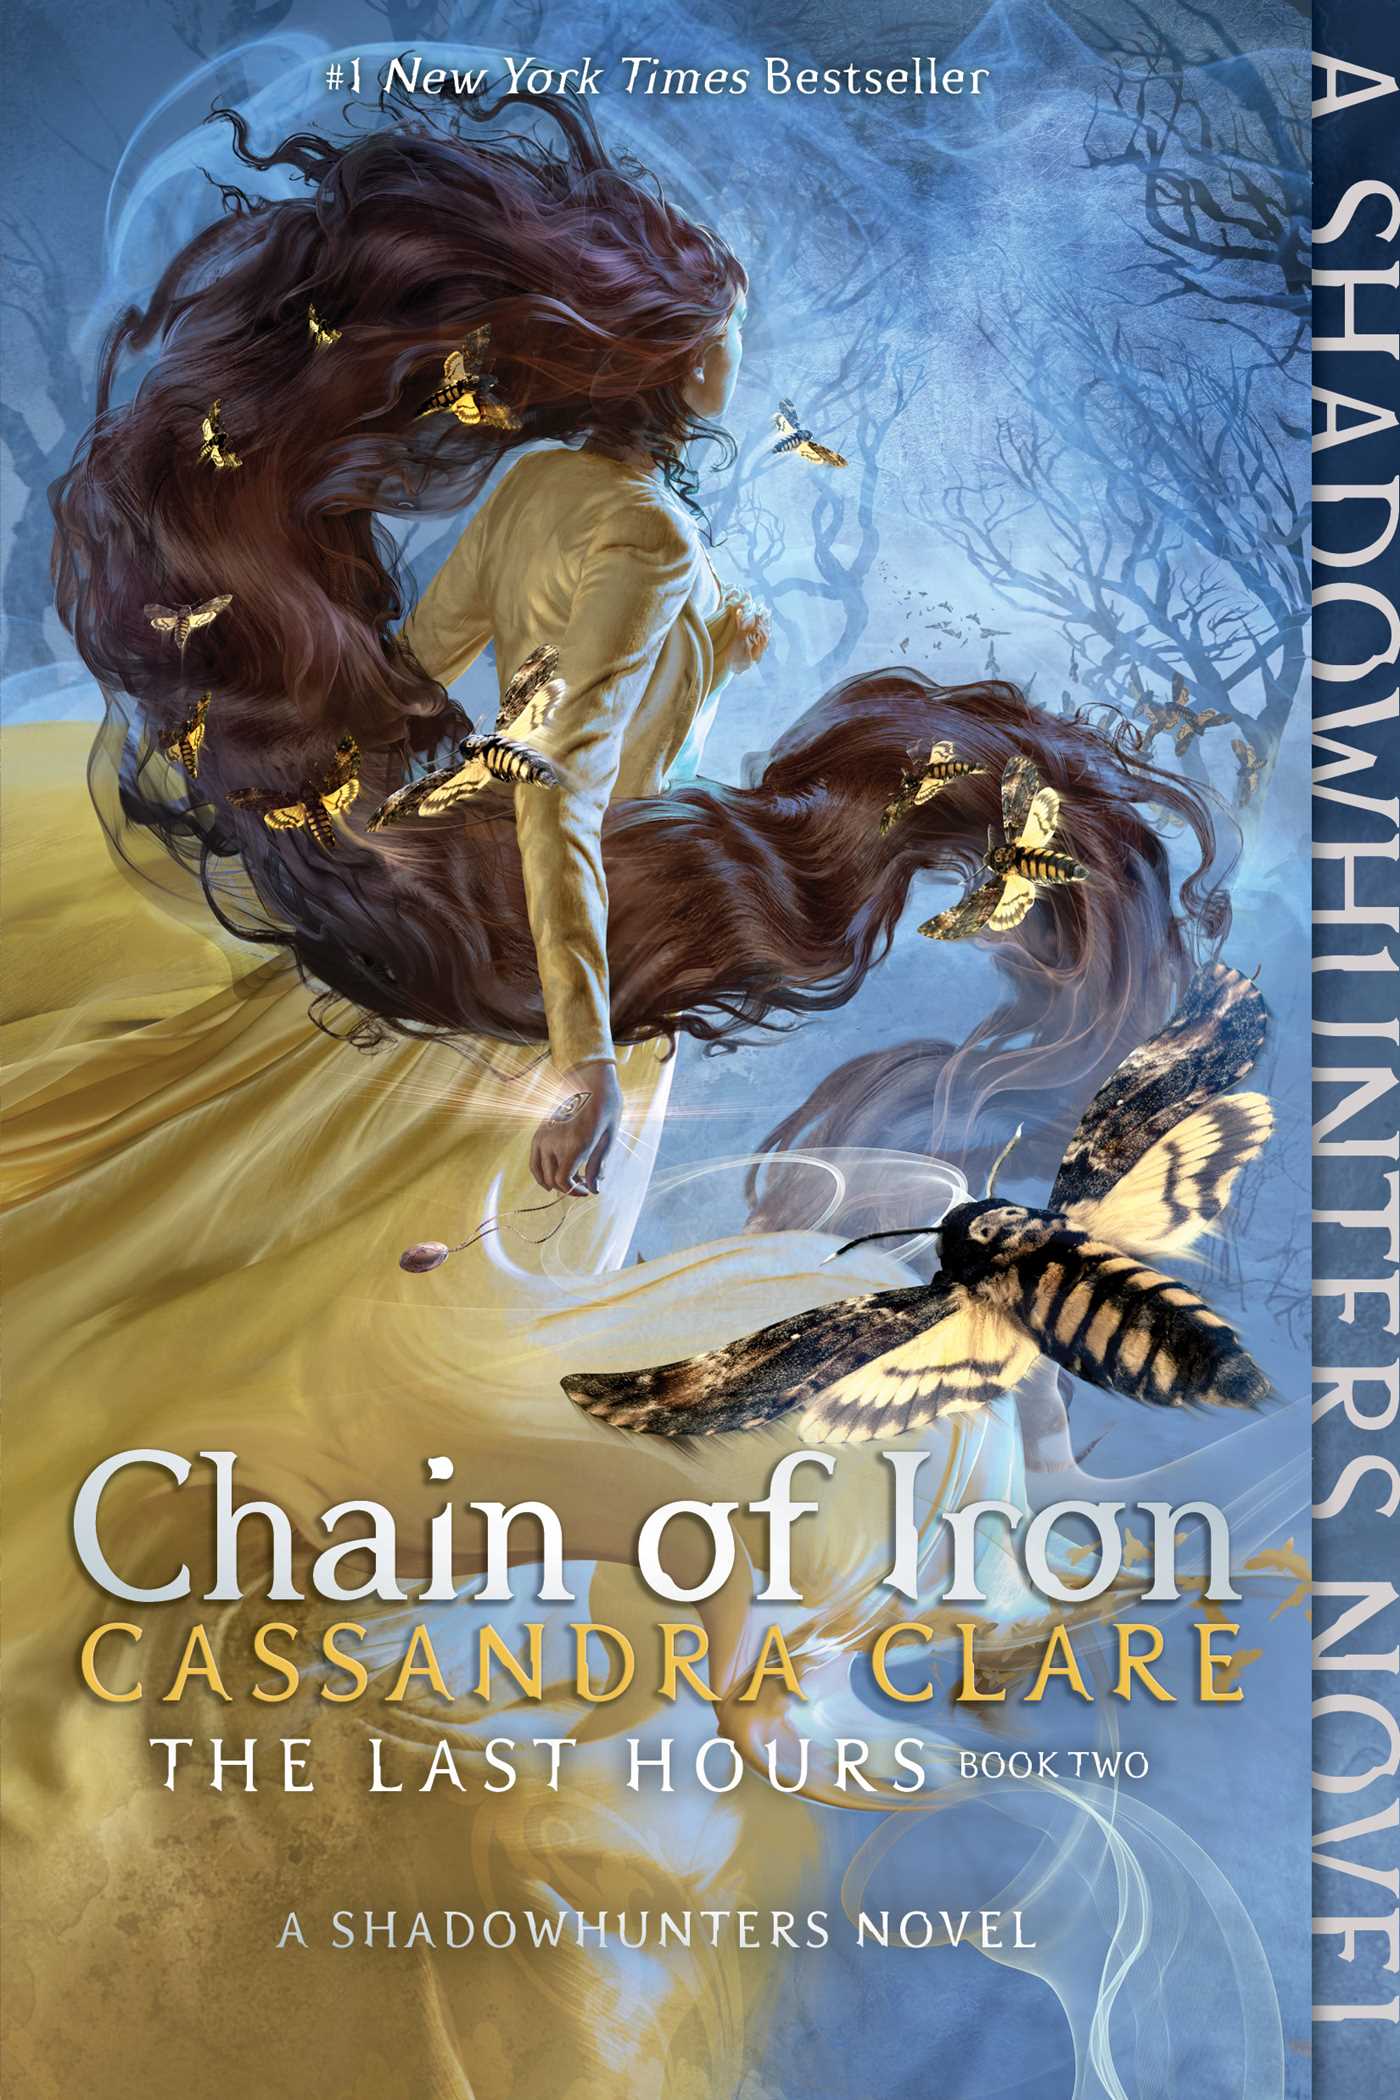 The Last Hours Vol.2 - Chain of Iron | Clare, Cassandra